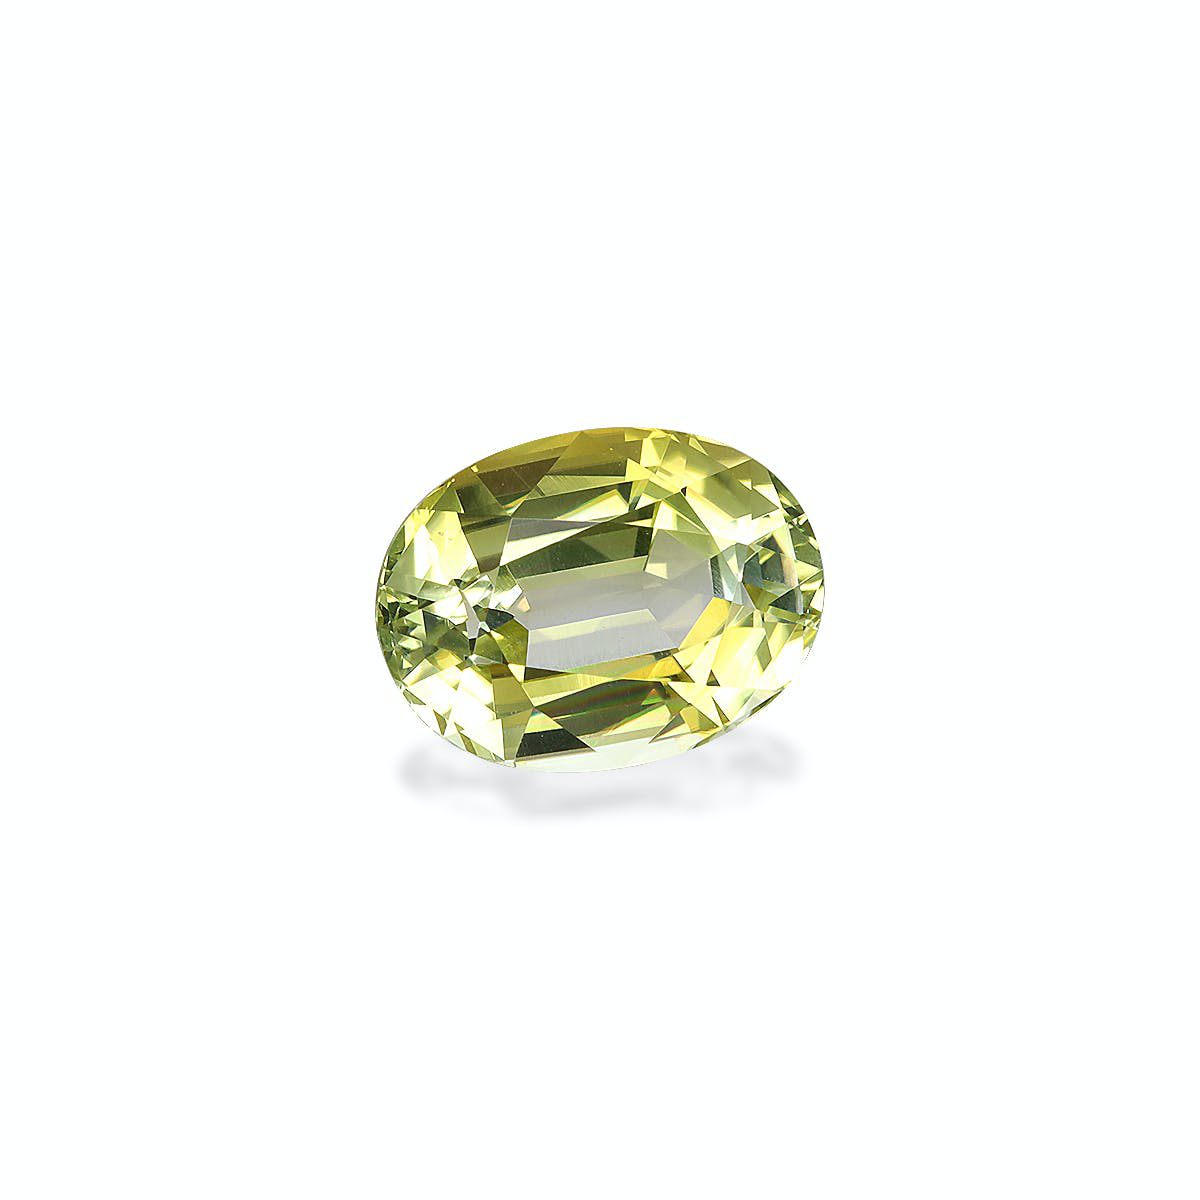 Picture of Lime Green Paraiba Tourmaline 6.18ct (PA1522)